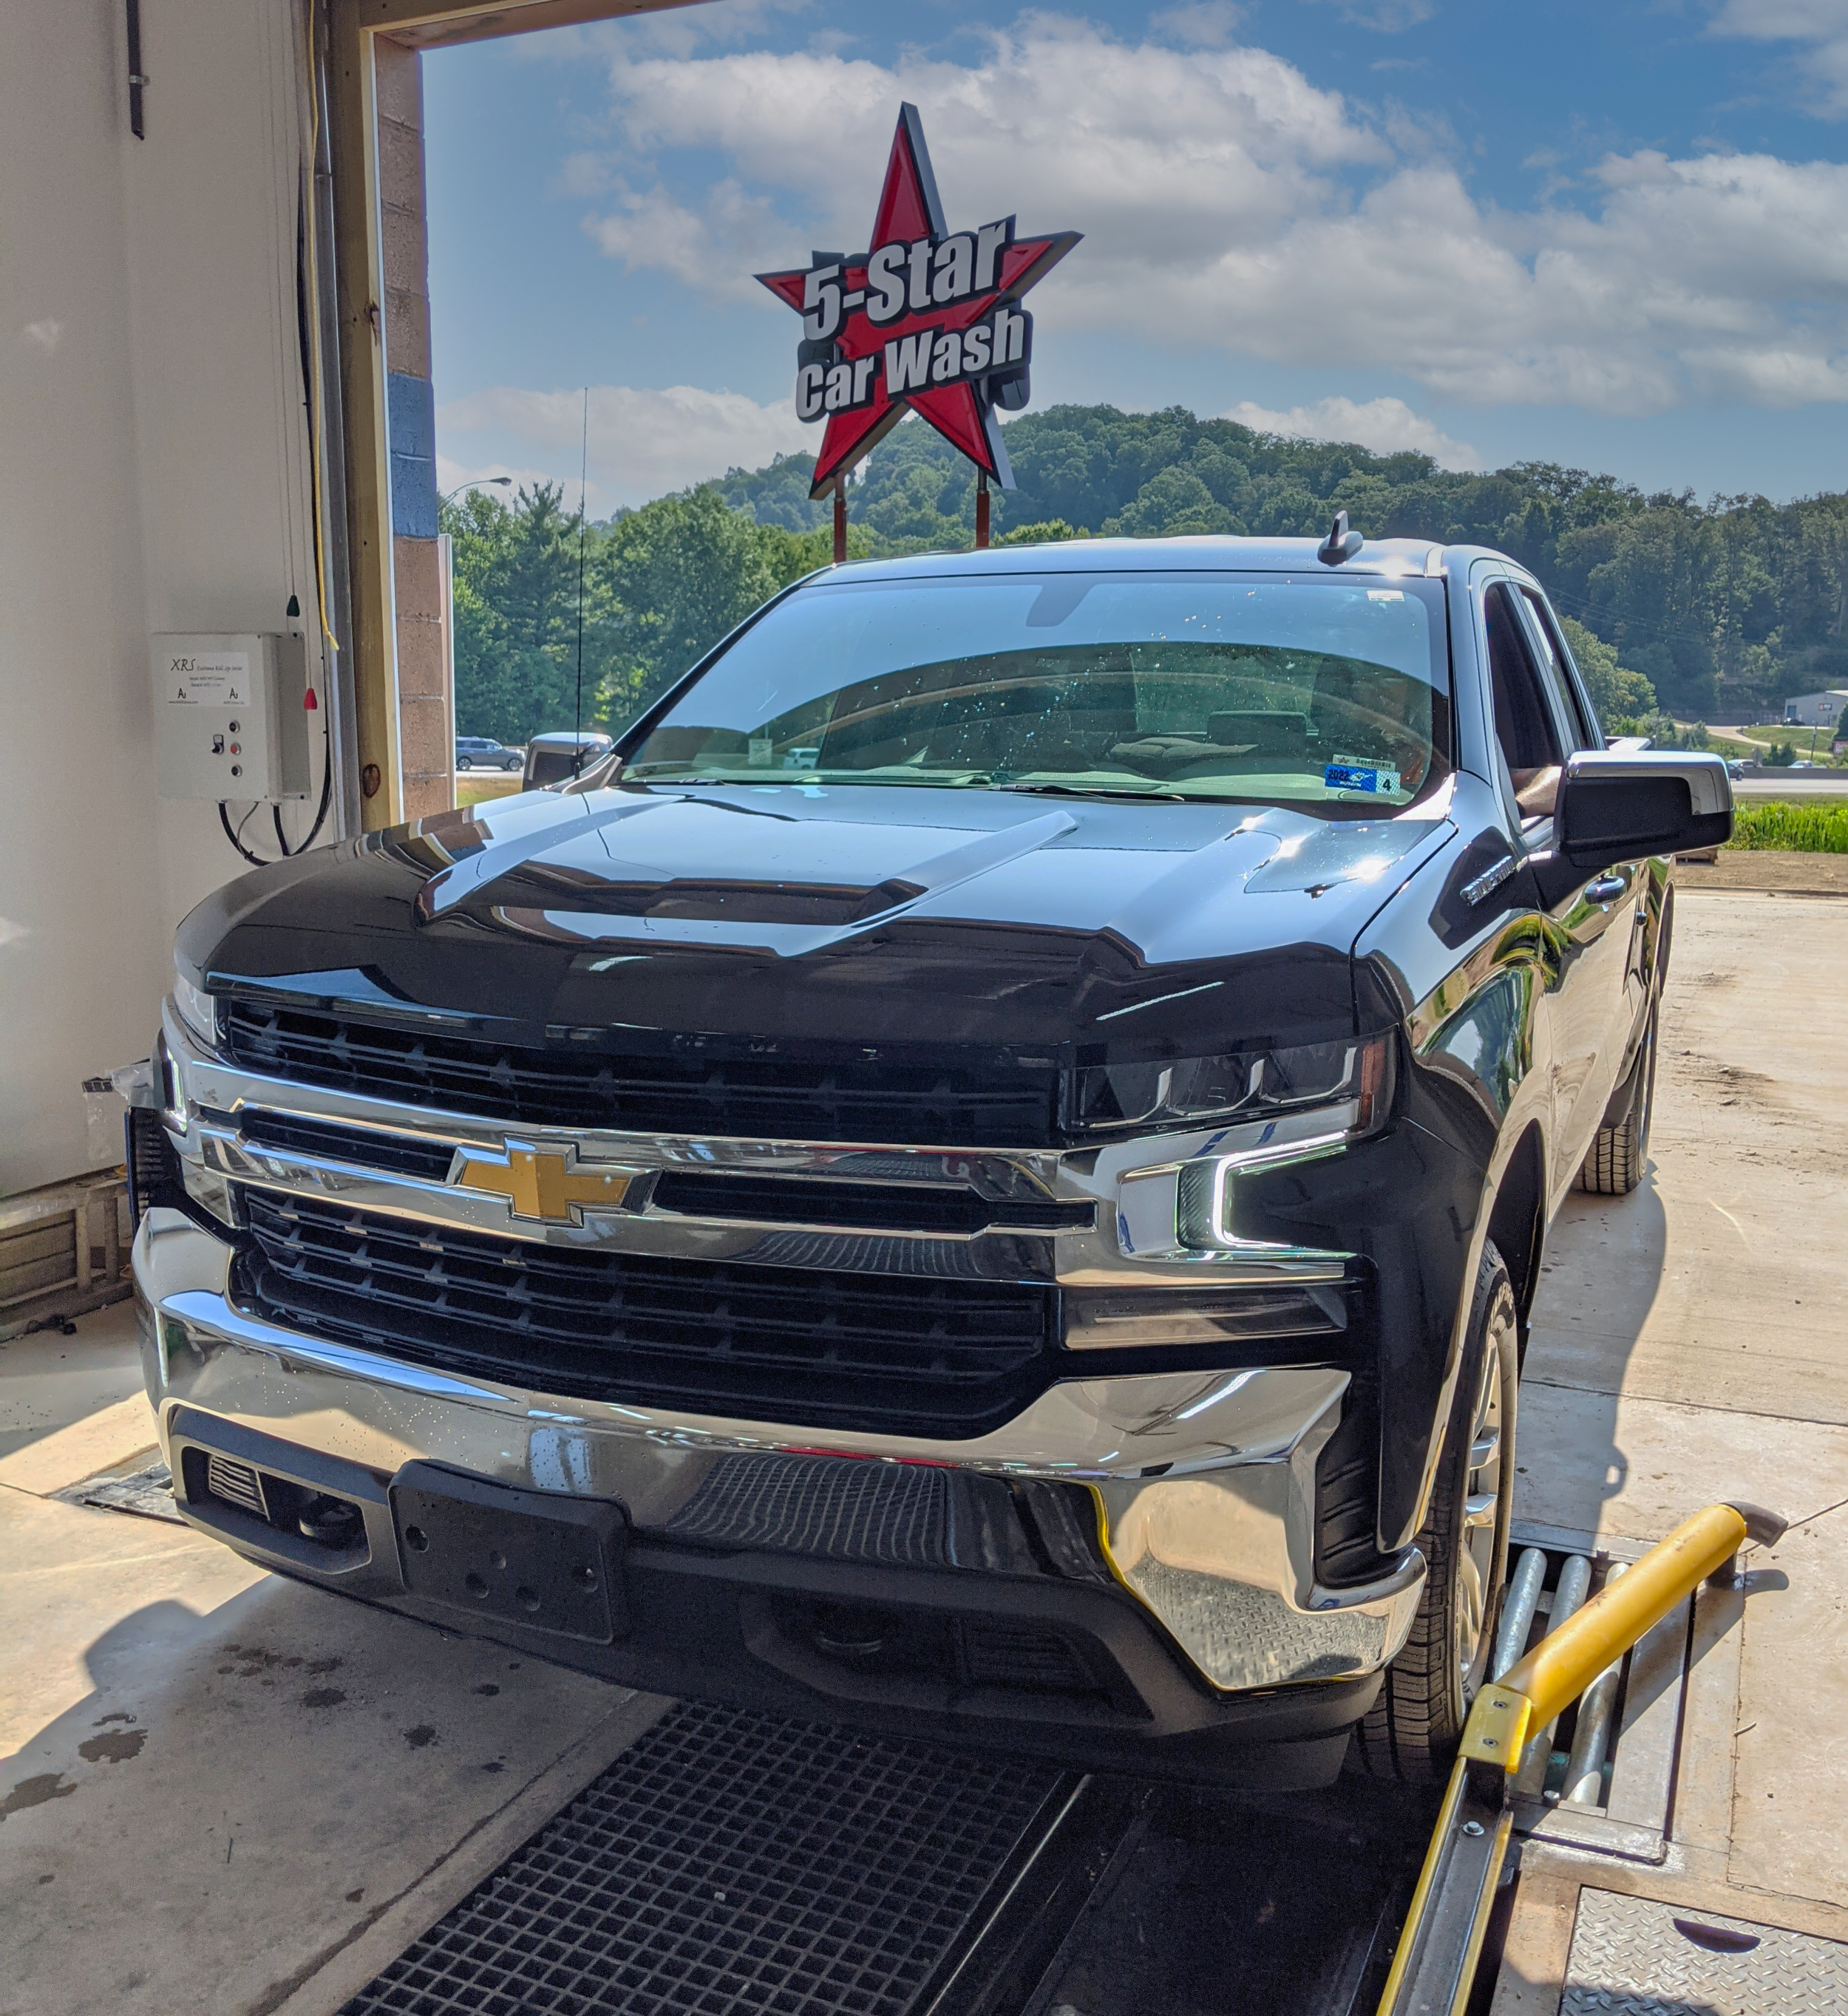 Washlink Systems - News - 5 Star Car Wash Adds Another